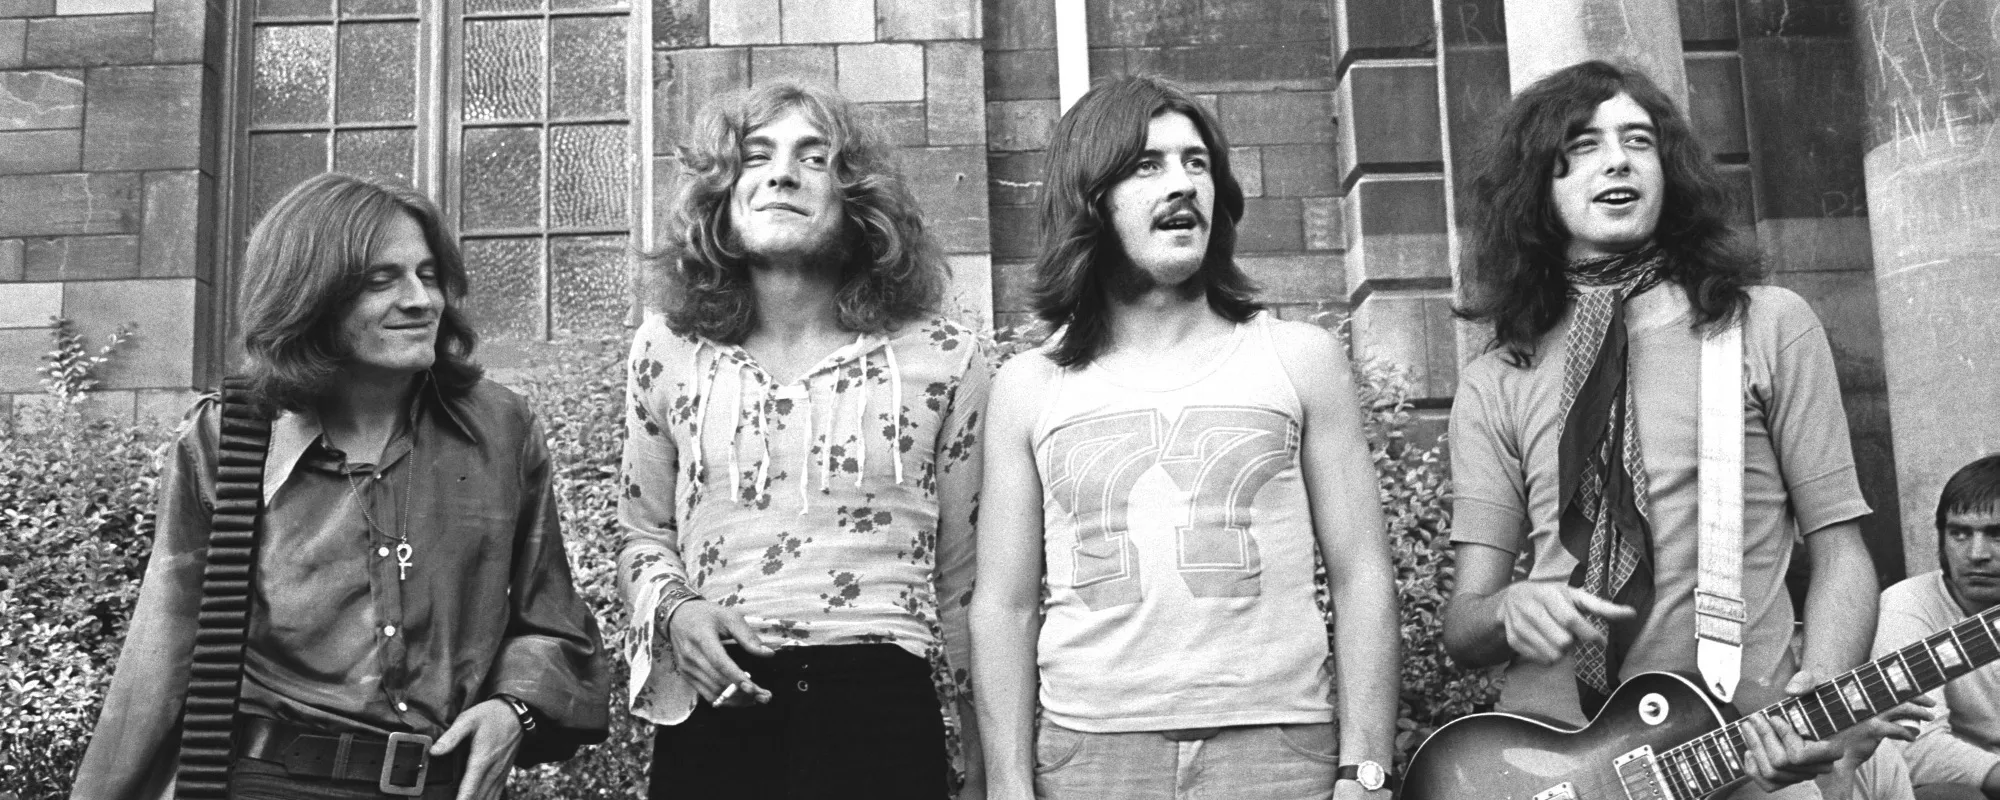 The Story Behind “Thank You” by Led Zeppelin